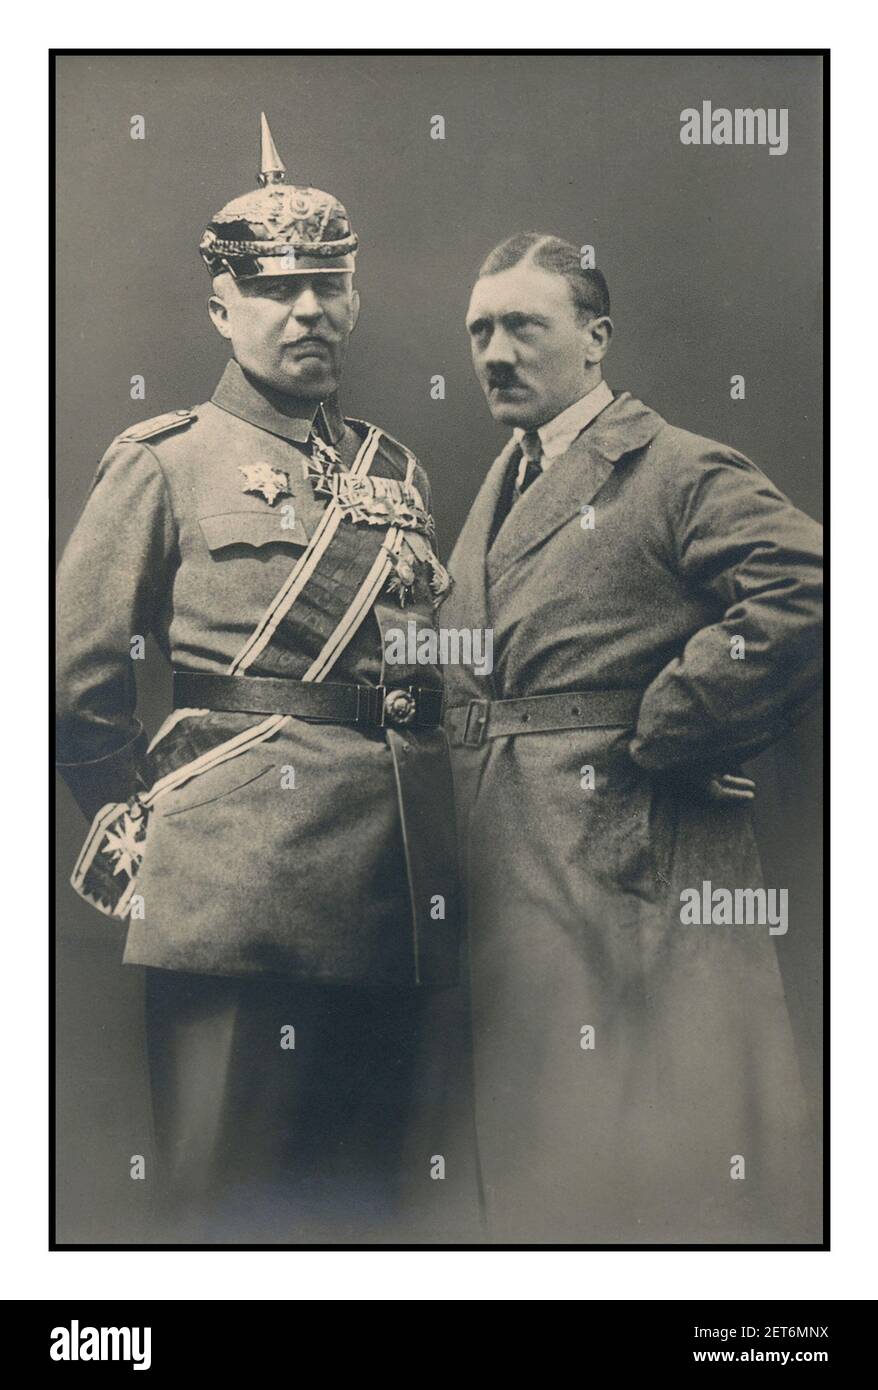 1923 Germany PUTSCH Propaganda Photo 'Adolf Hitler with General Ludendorff' photo card for 1920’s Germany.  Adolf Hitler with Ludendorff at the time of Beer Hall Putsch Trial. The Beer Hall Putsch was an unsuccessful attempt by the Nazi leader Adolf Hitler with General Ludendorff and other leaders to seize power in Munich, Bavaria, Germany Stock Photo